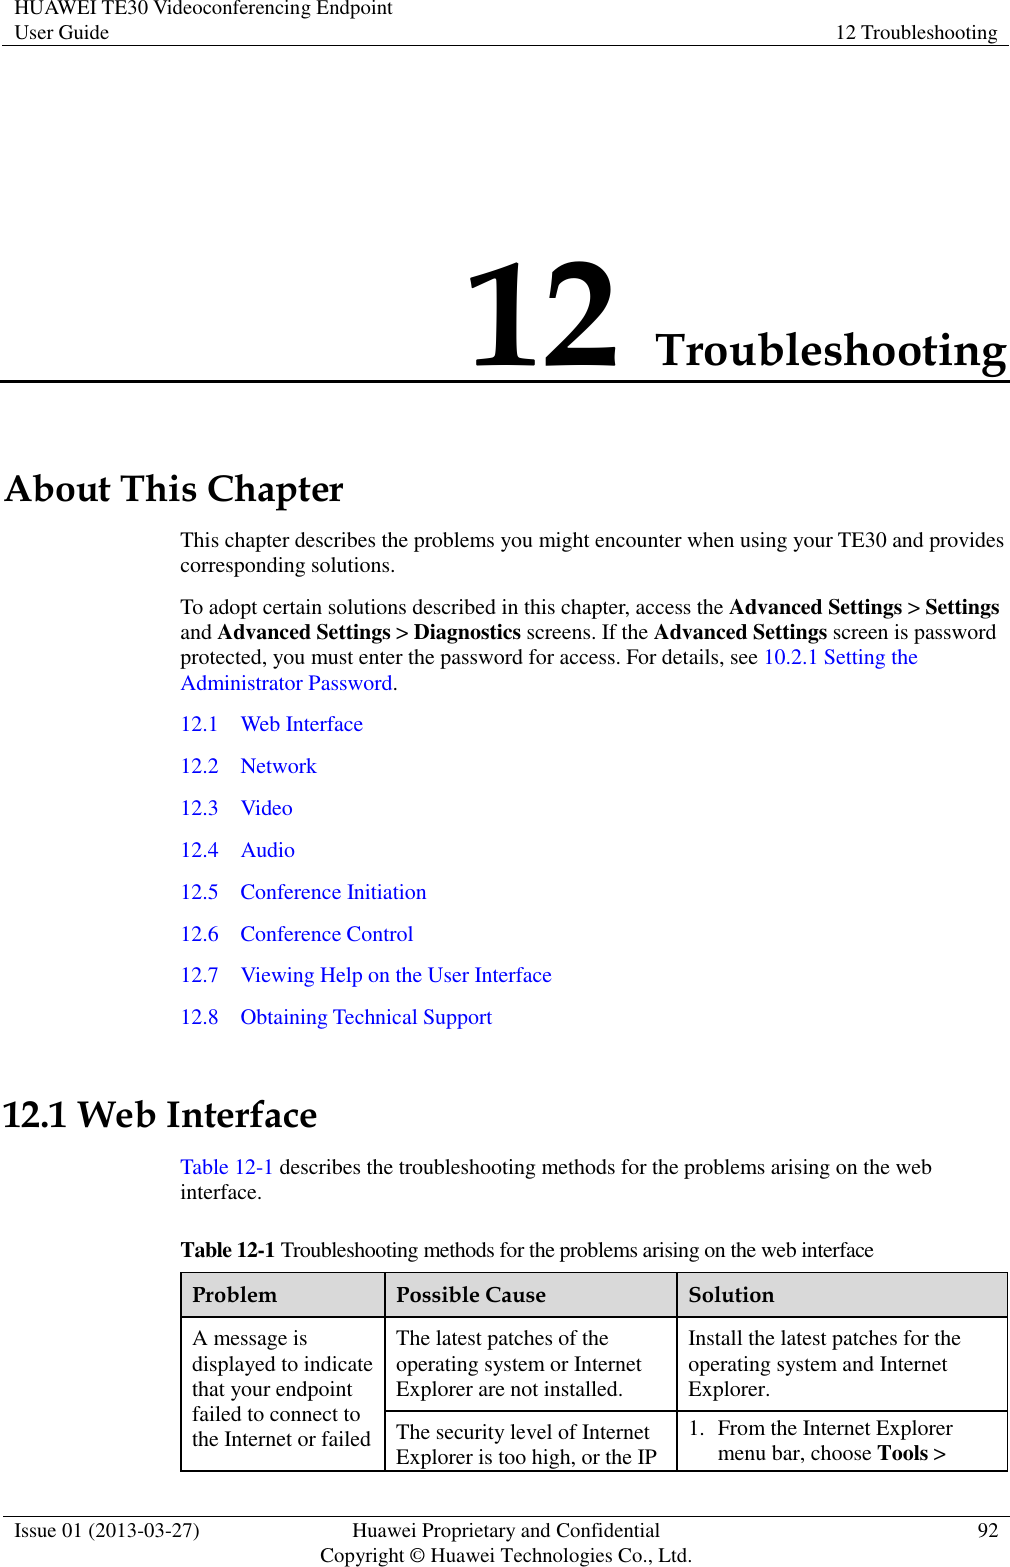 HUAWEI TE30 Videoconferencing Endpoint User Guide 12 Troubleshooting  Issue 01 (2013-03-27) Huawei Proprietary and Confidential                                     Copyright © Huawei Technologies Co., Ltd. 92  12 Troubleshooting About This Chapter This chapter describes the problems you might encounter when using your TE30 and provides corresponding solutions. To adopt certain solutions described in this chapter, access the Advanced Settings &gt; Settings and Advanced Settings &gt; Diagnostics screens. If the Advanced Settings screen is password protected, you must enter the password for access. For details, see 10.2.1 Setting the Administrator Password. 12.1    Web Interface 12.2    Network 12.3    Video 12.4    Audio 12.5    Conference Initiation 12.6    Conference Control 12.7    Viewing Help on the User Interface 12.8    Obtaining Technical Support 12.1 Web Interface Table 12-1 describes the troubleshooting methods for the problems arising on the web interface. Table 12-1 Troubleshooting methods for the problems arising on the web interface Problem Possible Cause Solution A message is displayed to indicate that your endpoint failed to connect to the Internet or failed The latest patches of the operating system or Internet Explorer are not installed. Install the latest patches for the operating system and Internet Explorer. The security level of Internet Explorer is too high, or the IP 1. From the Internet Explorer menu bar, choose Tools &gt; 